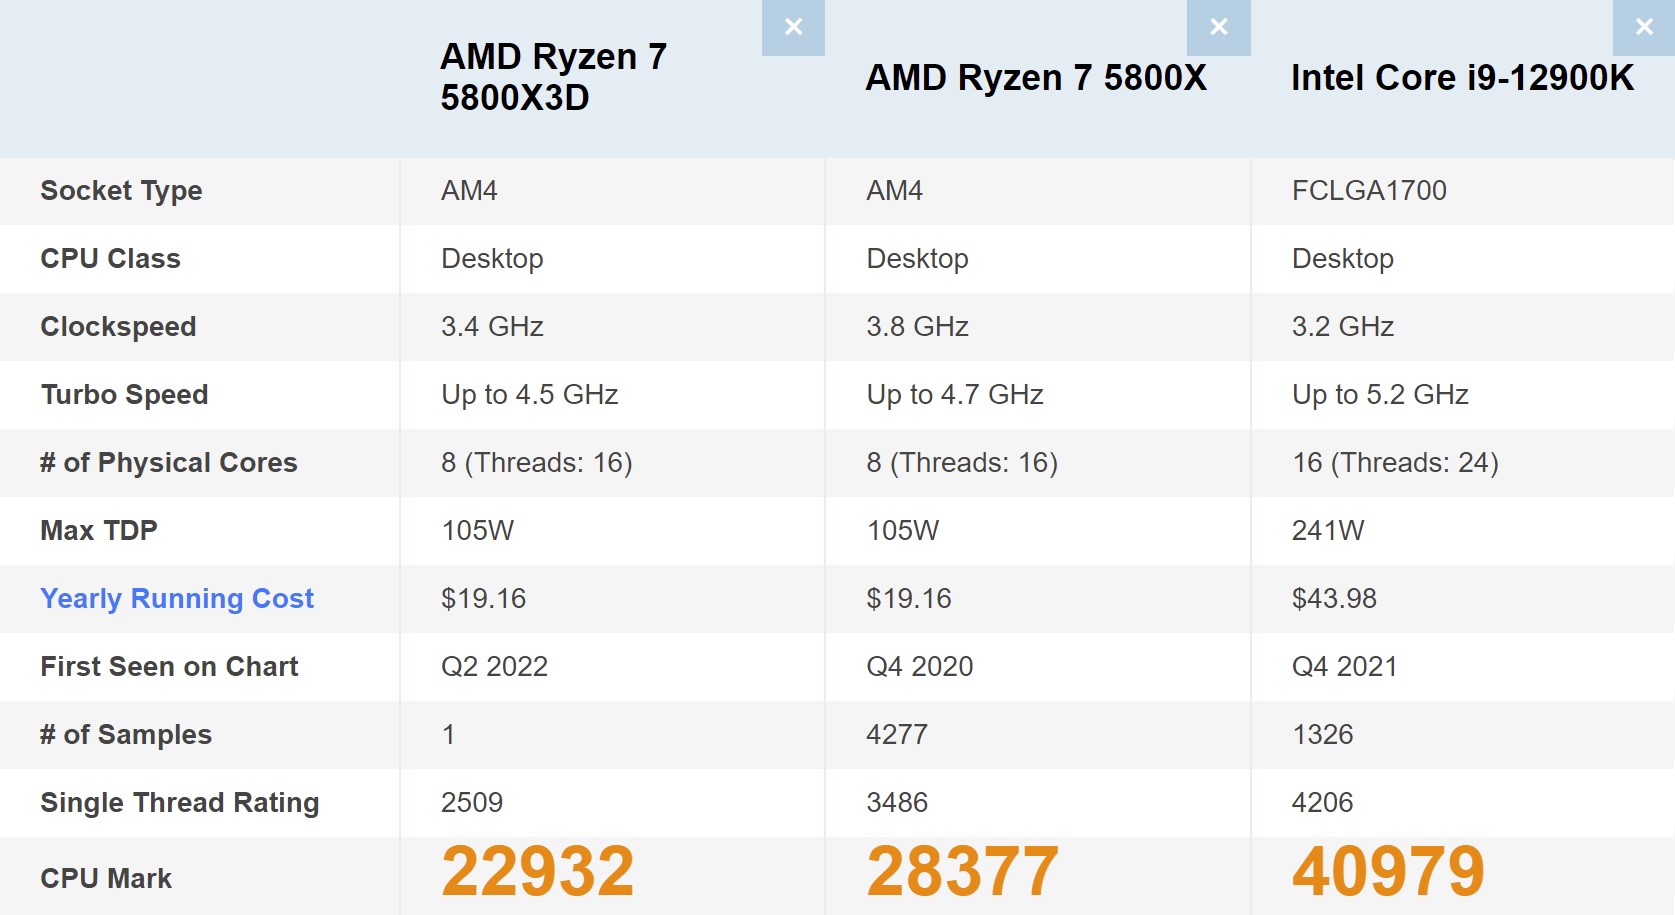 AMD launches Ryzen 7 5800X3D with 3D V-cache that squares off against the  Core i9-12900K in gaming; Zen 4 and Socket AM5 now official -   News